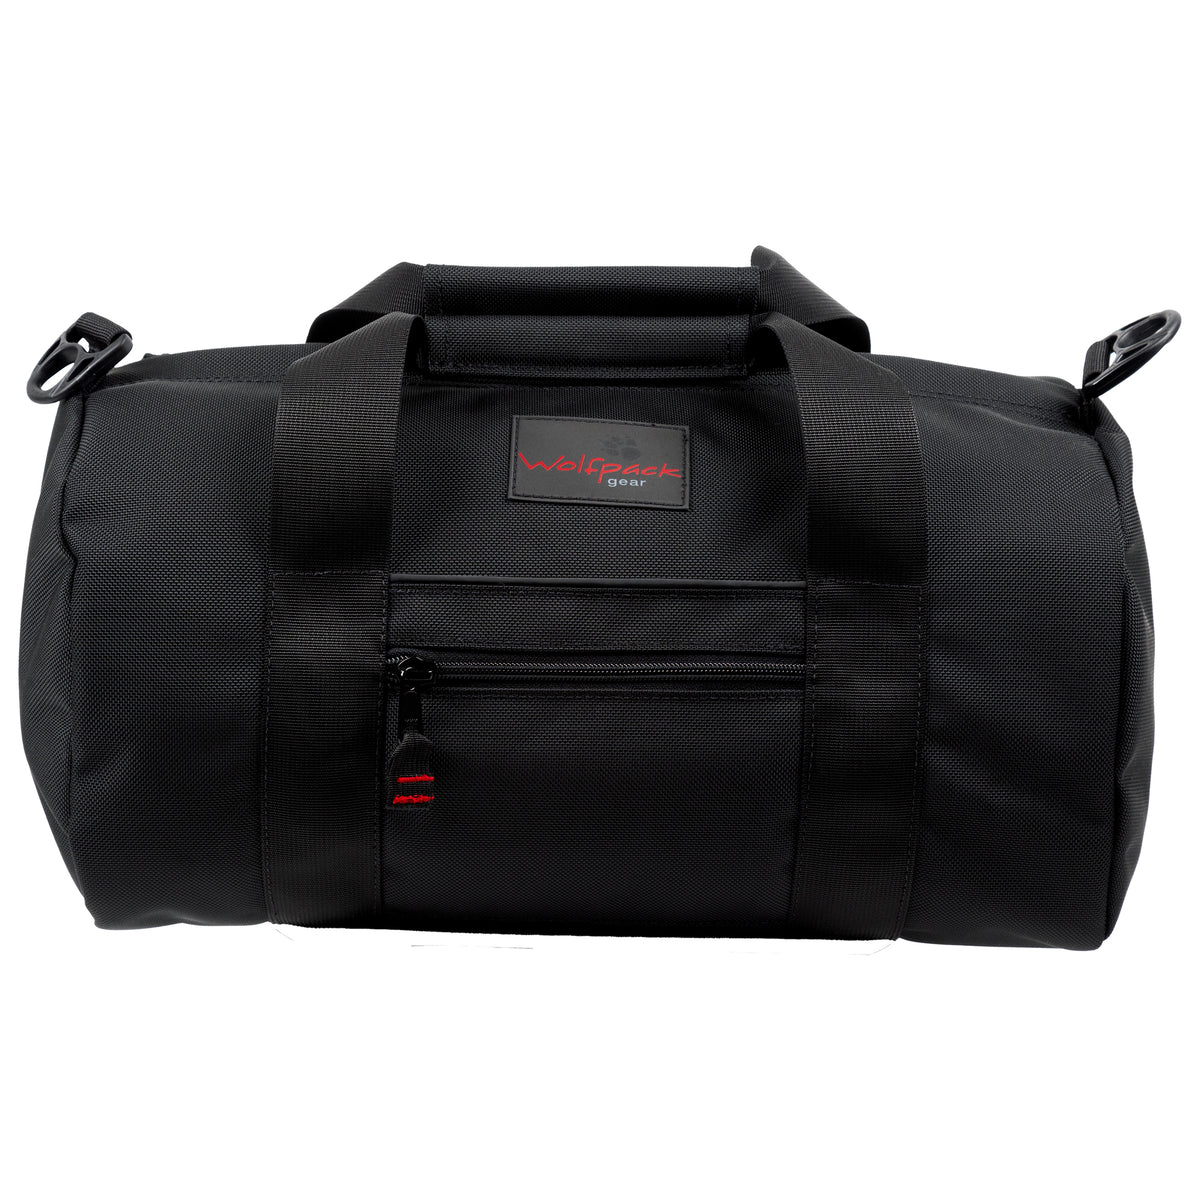 Wolfpack Gear™ Small Duffle Bag - made in USA